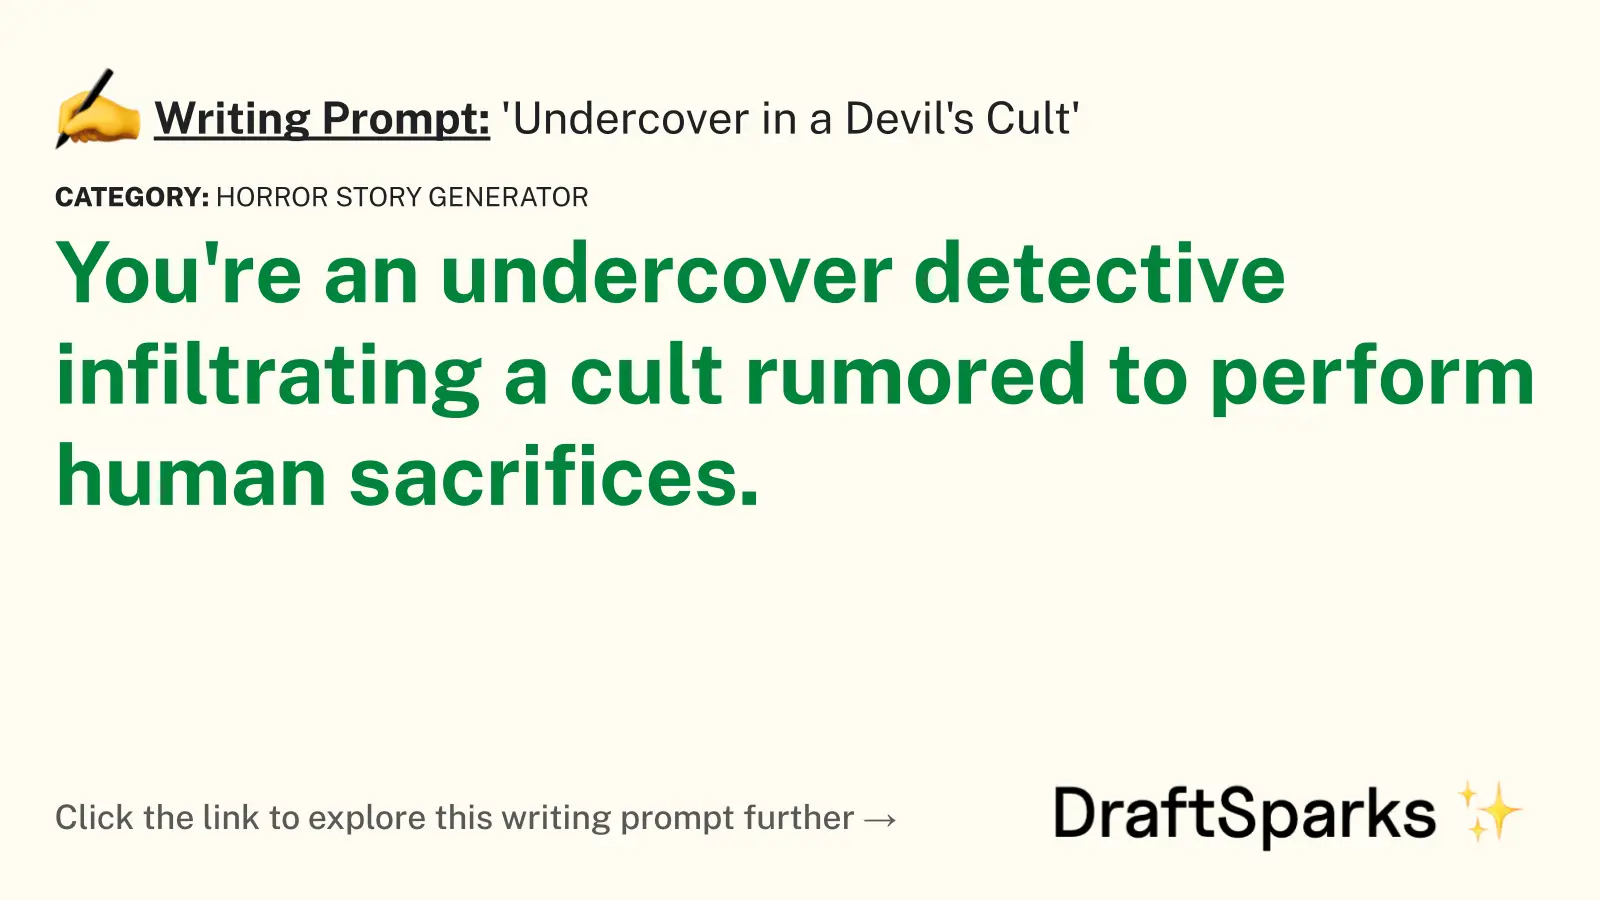 ‘Undercover in a Devil’s Cult’